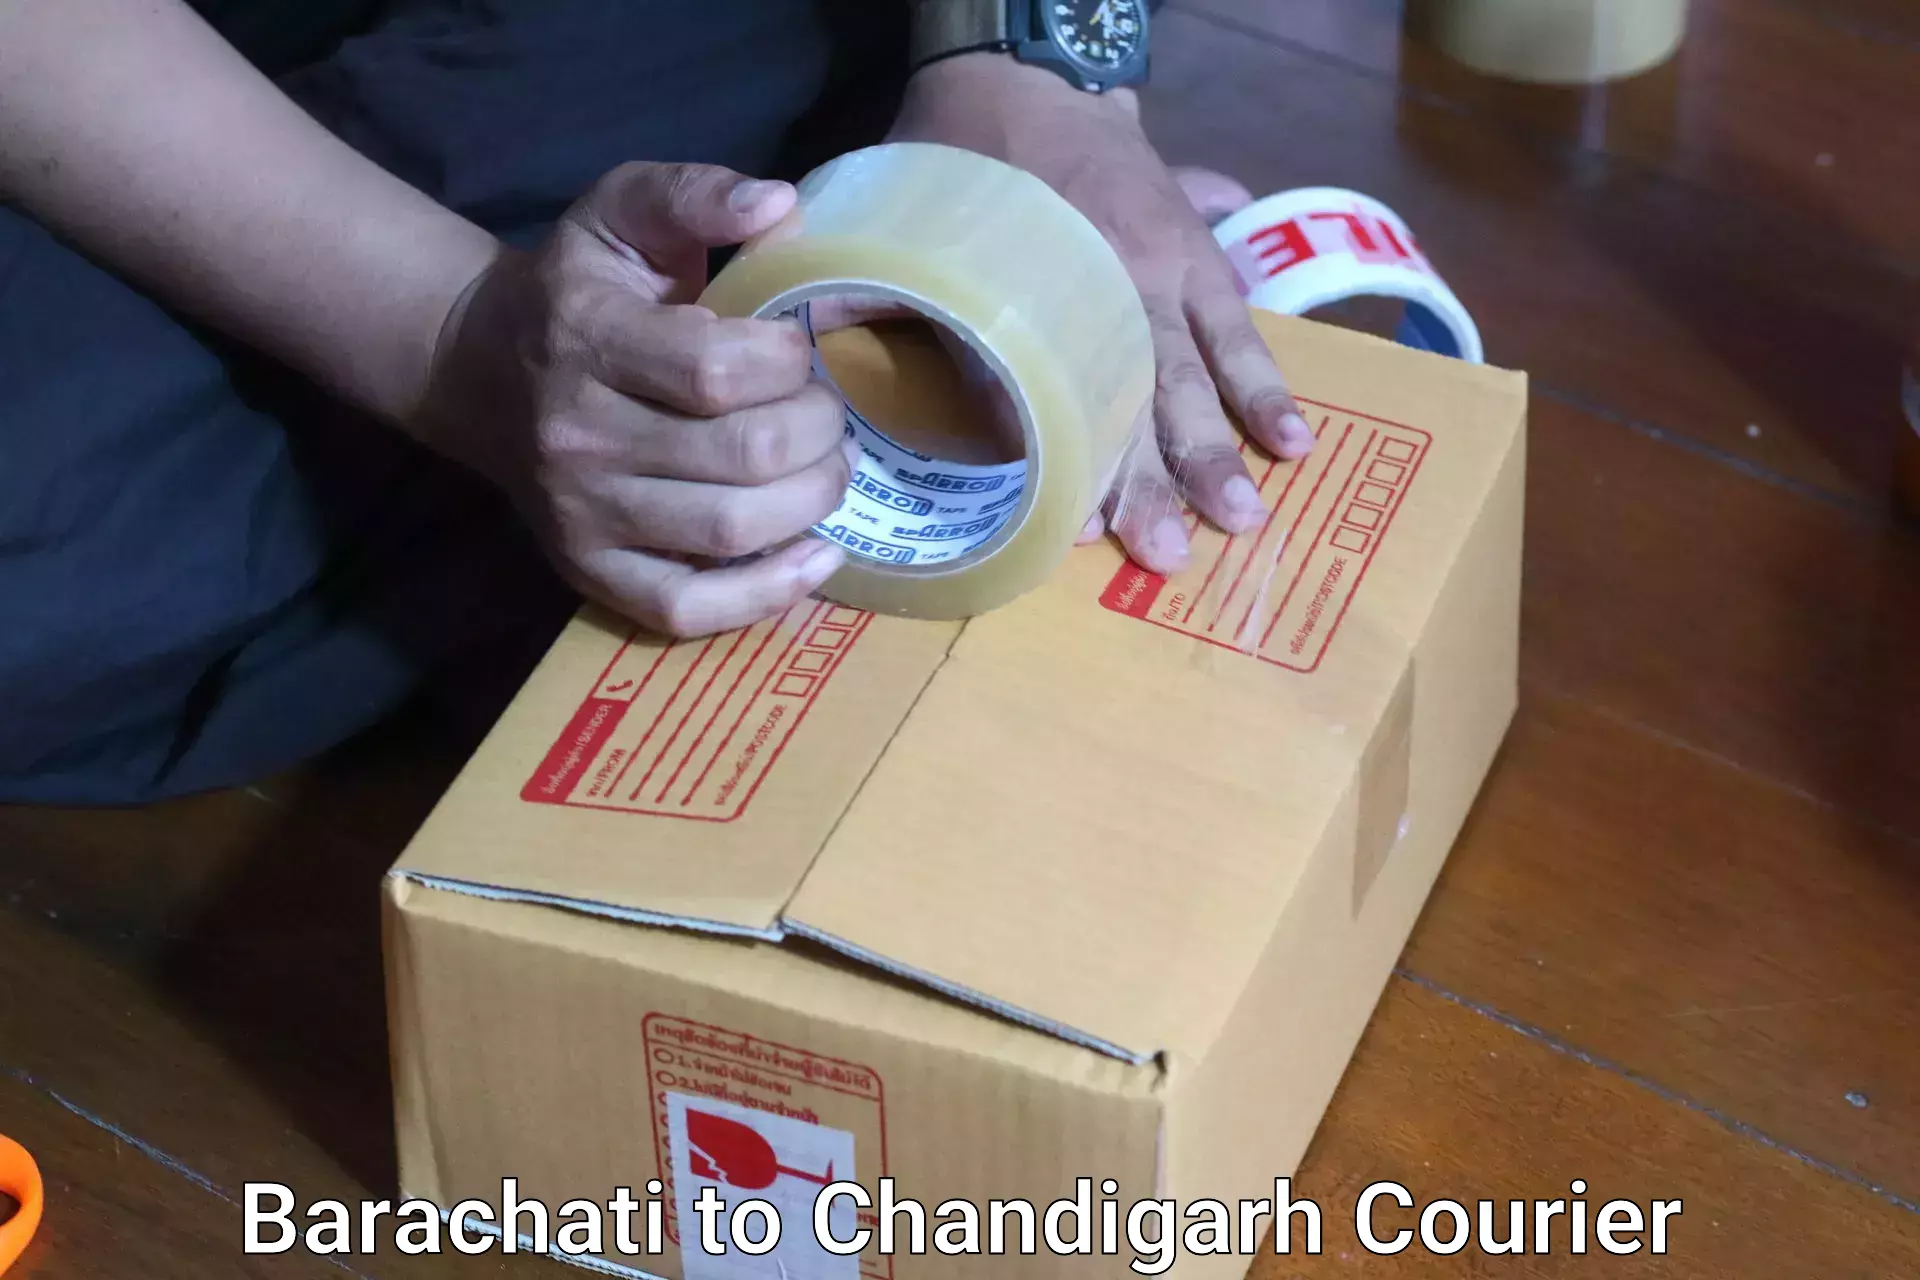 Luggage delivery system Barachati to Chandigarh